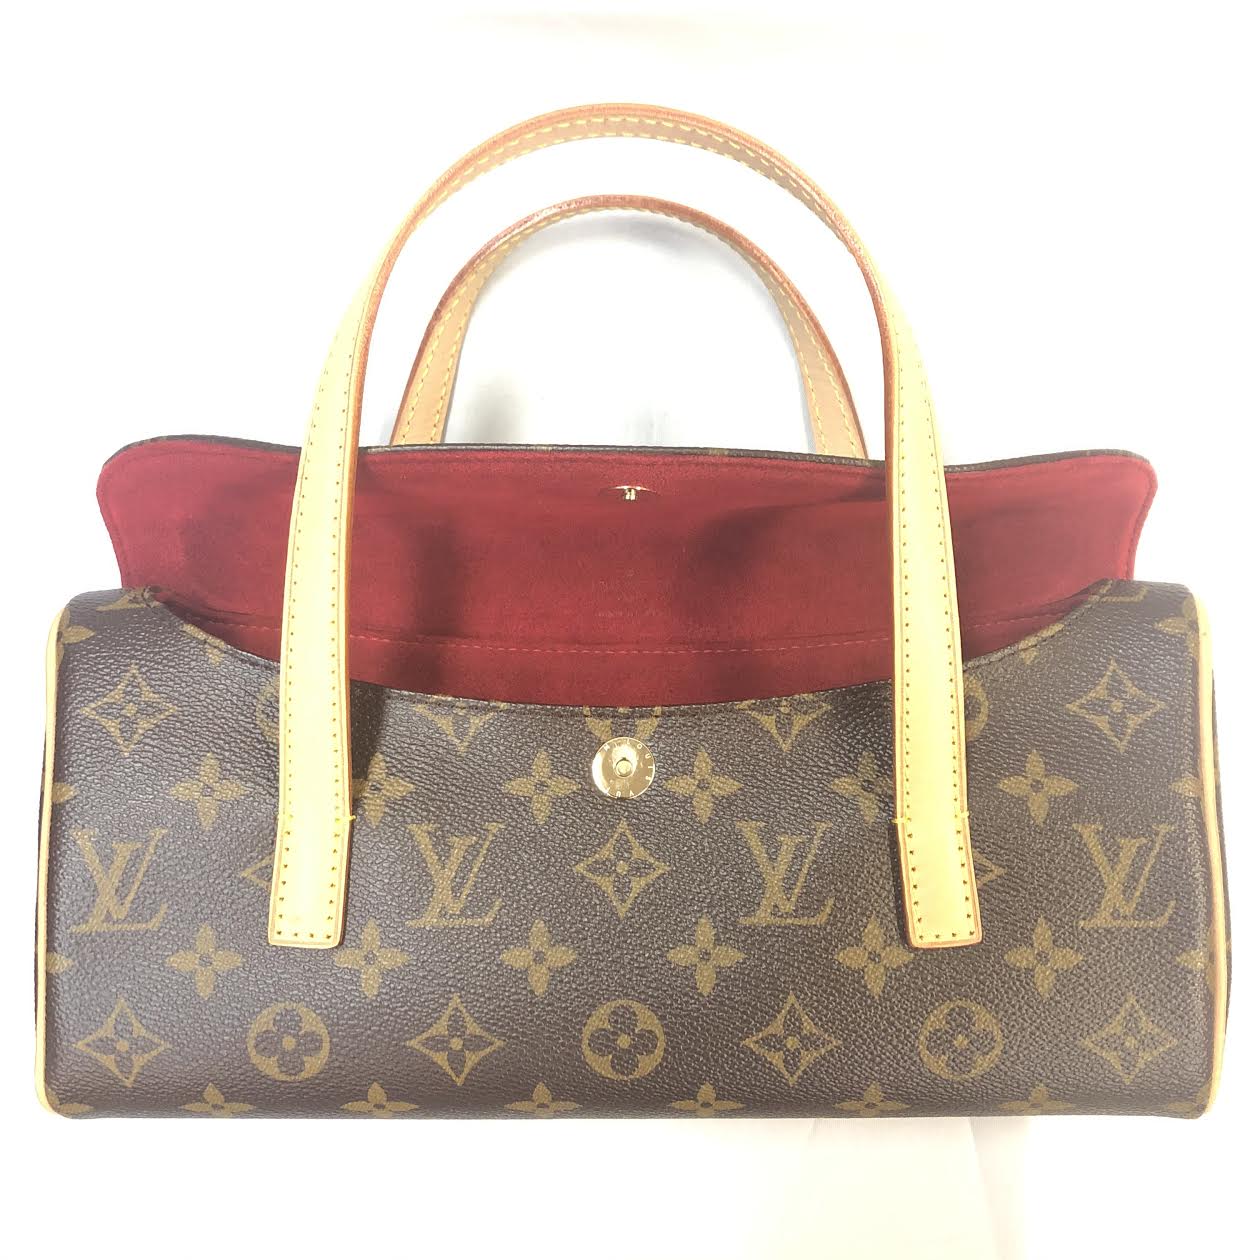 How To Treat Louis Vuitton Leather